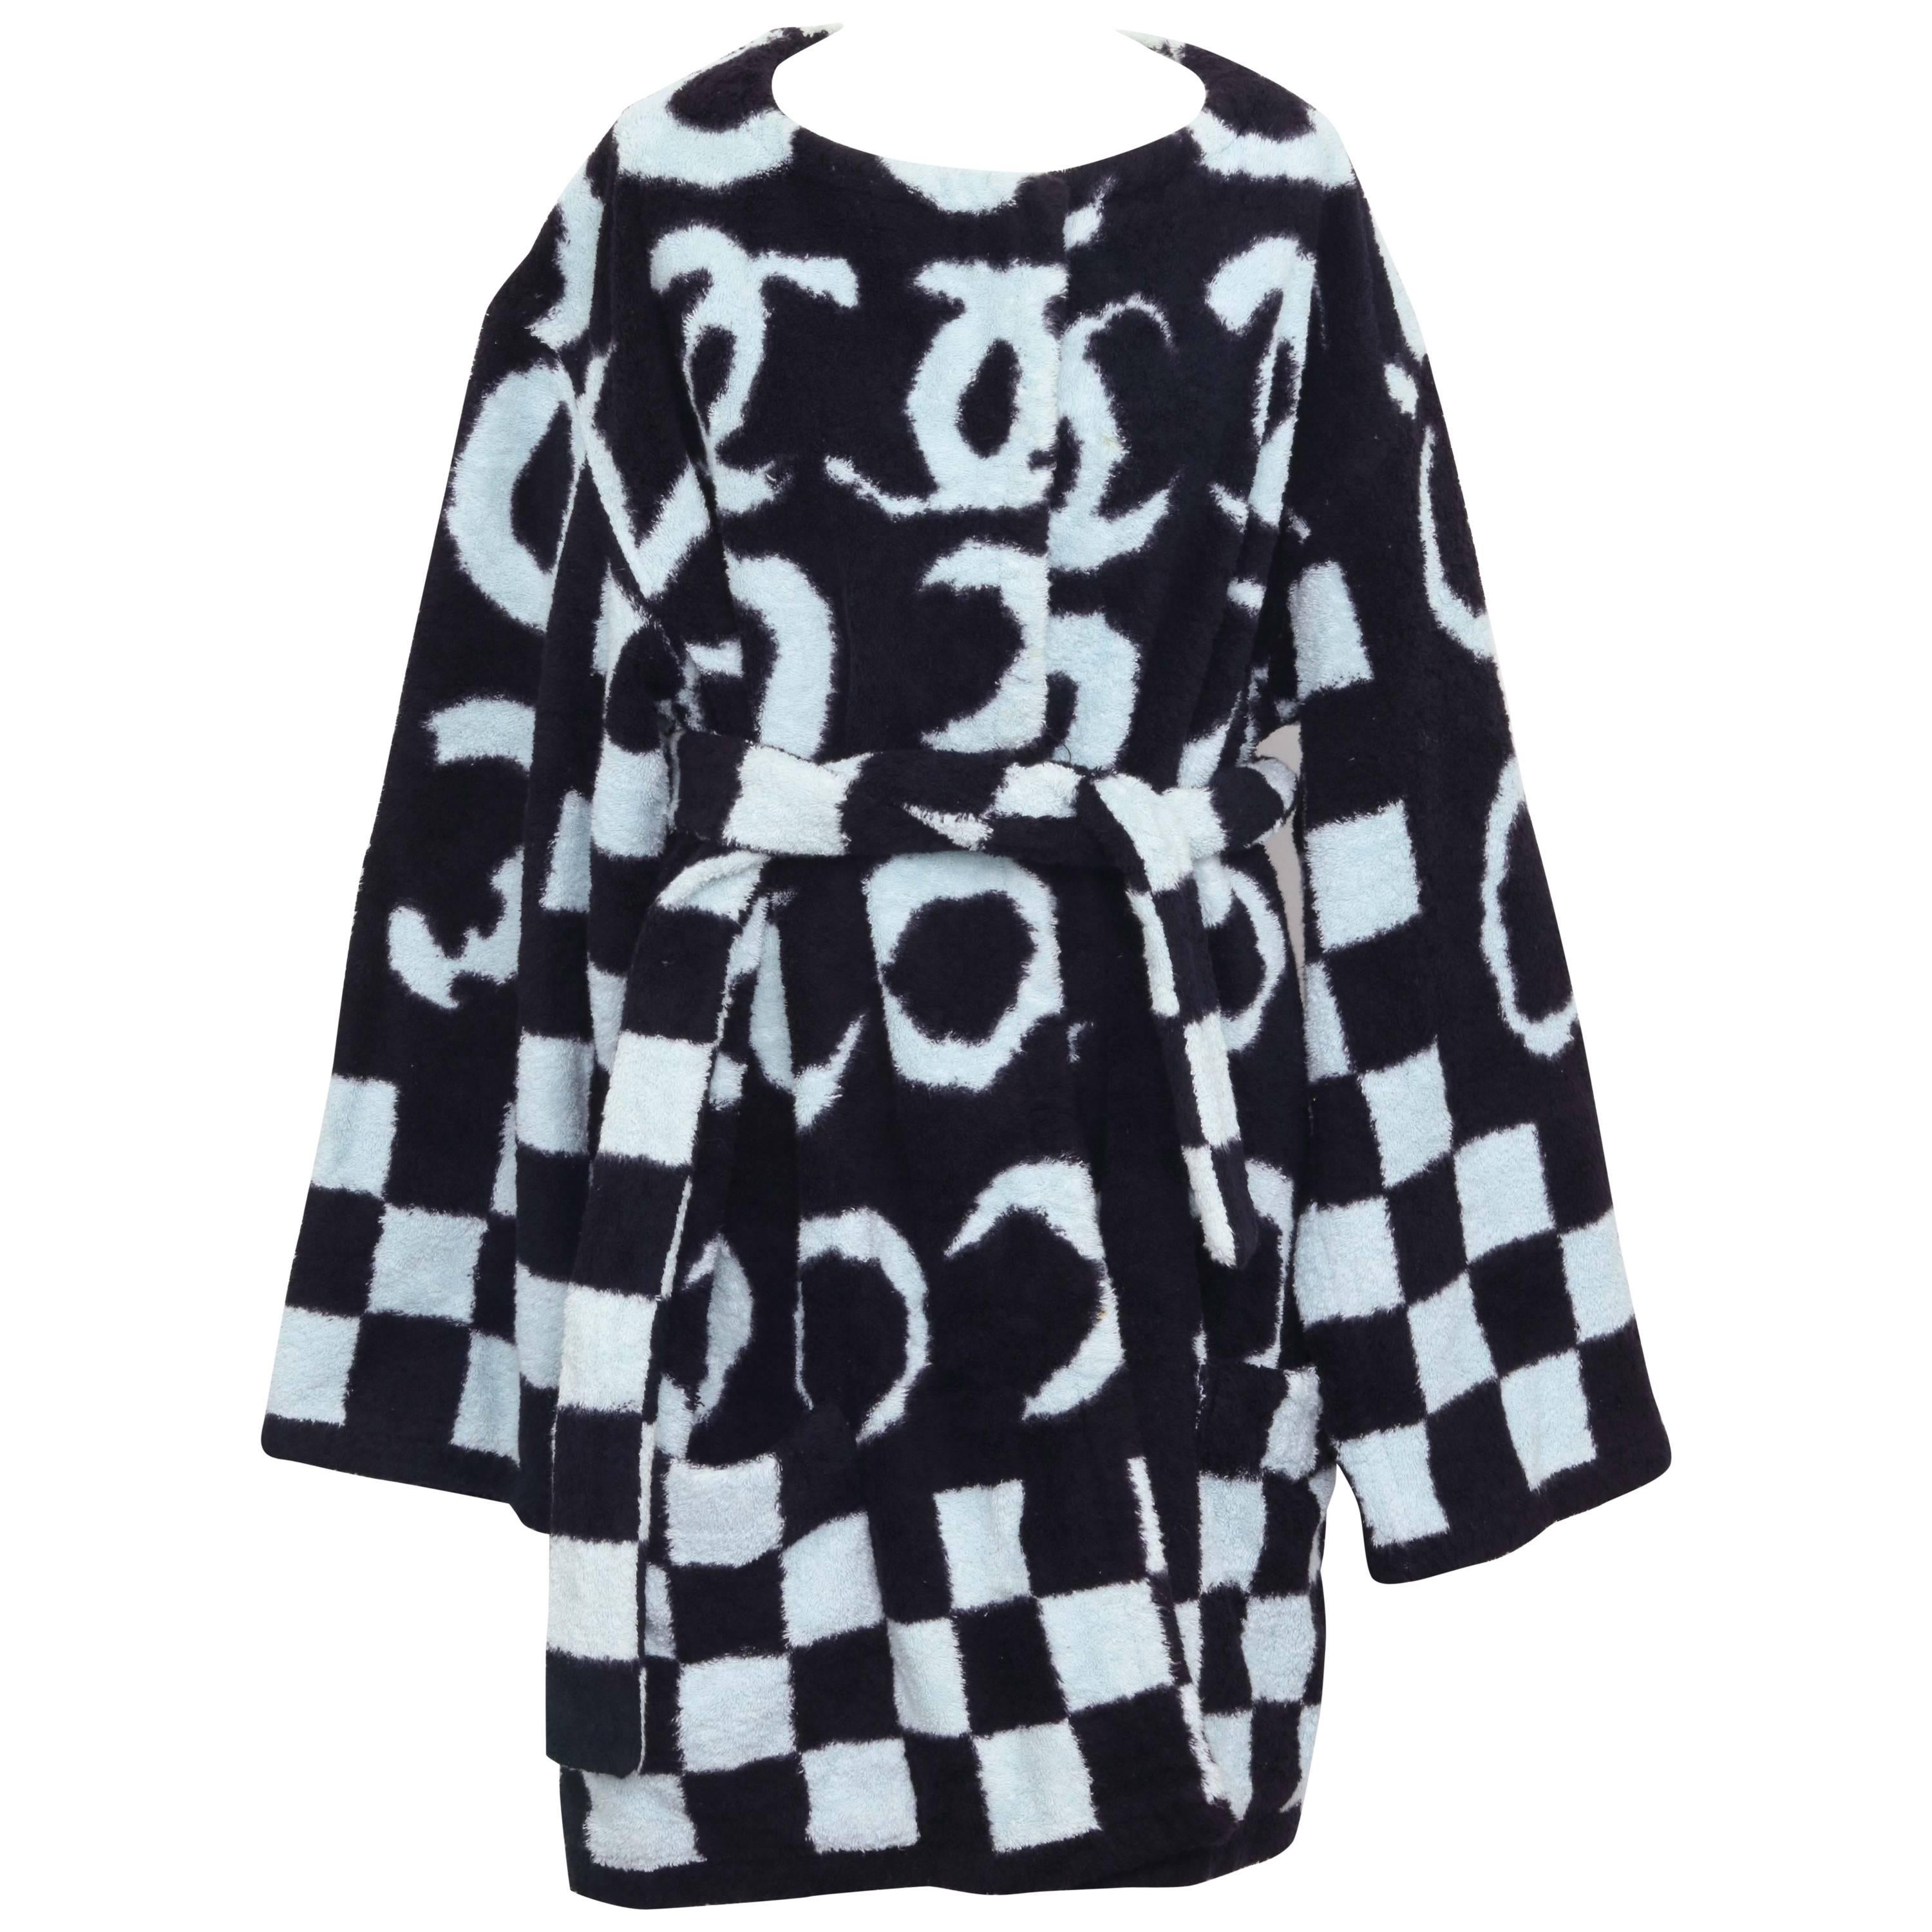 Very Rare Chanel Terry Bath Robe with Iconic CC